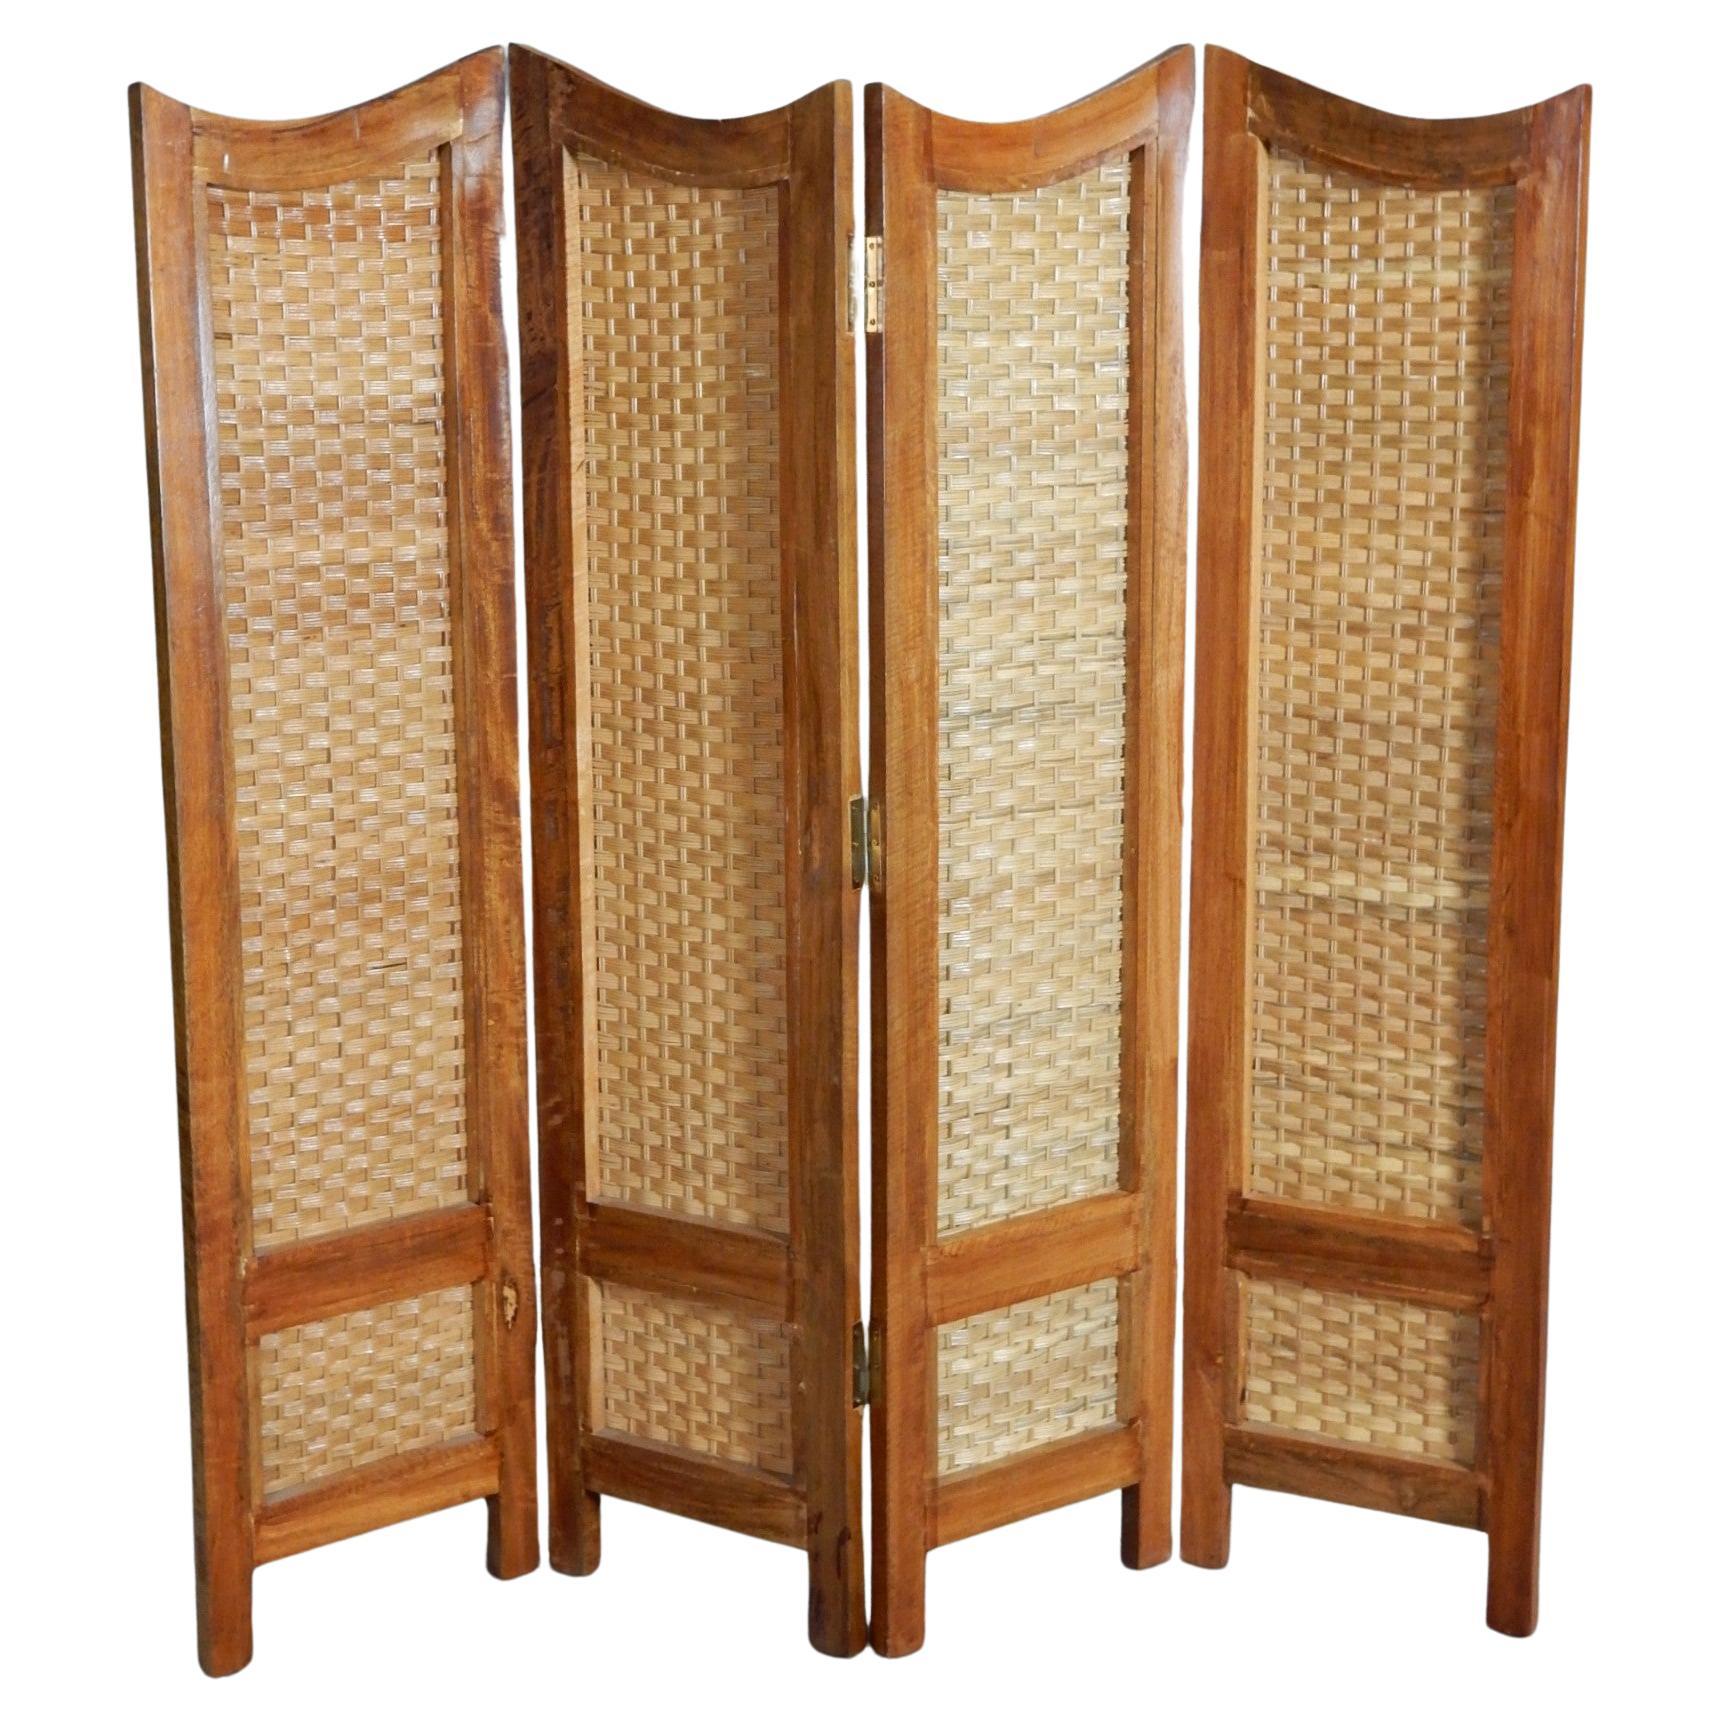 Mexican Modernism Woven Cane Rattan Screen Room Divider after Clara Porset For Sale 1